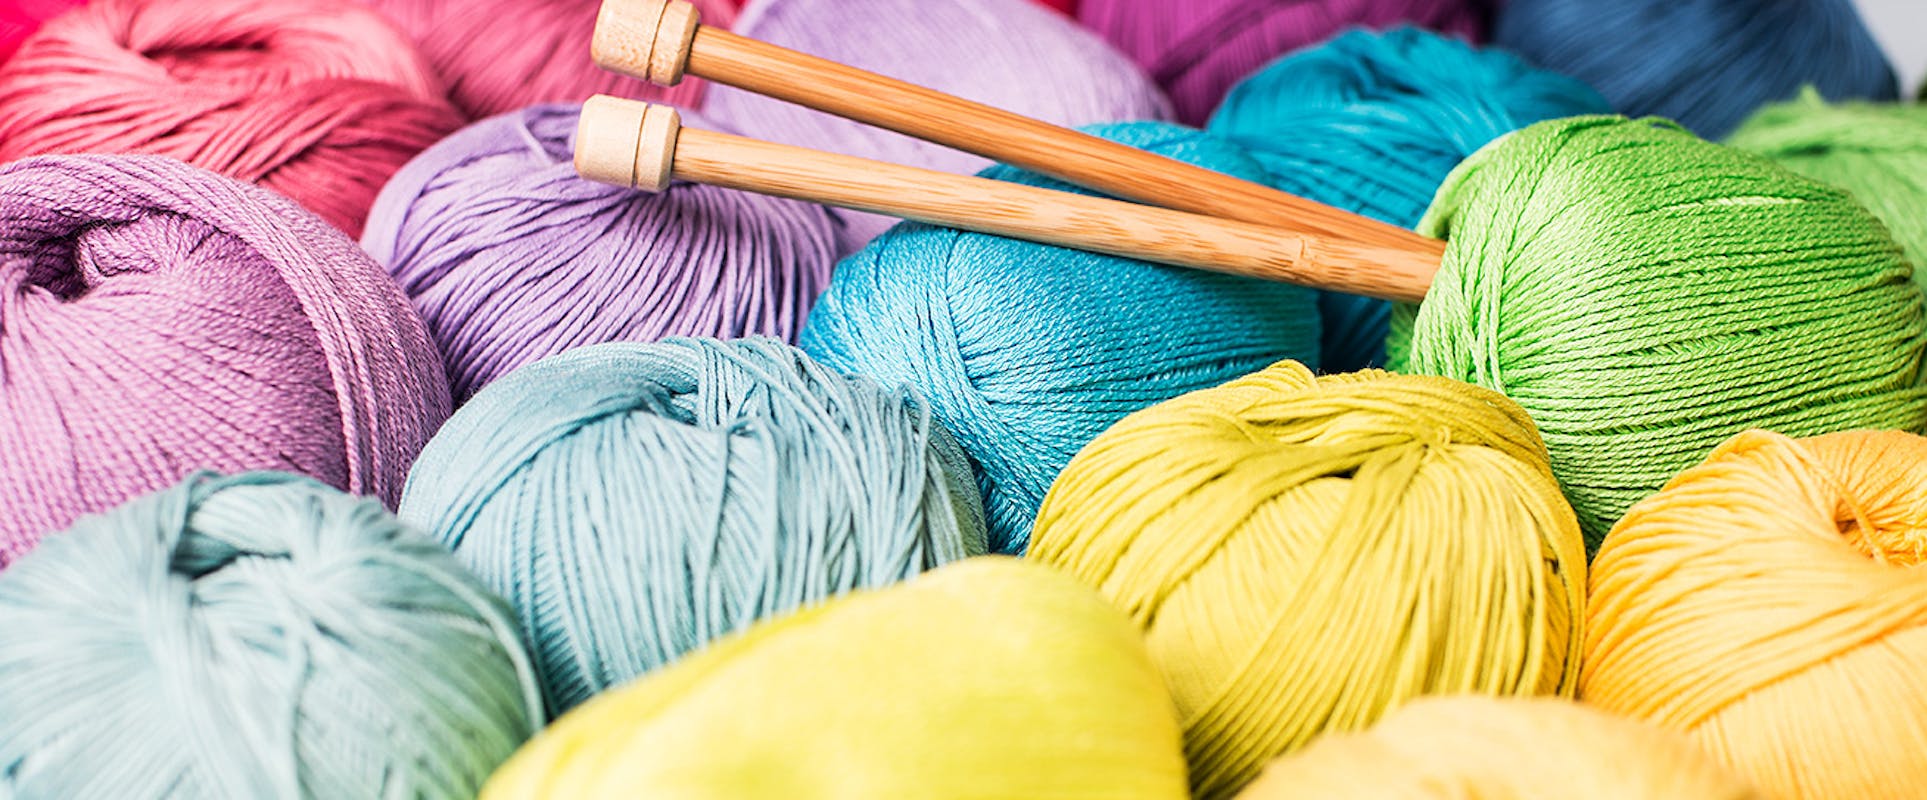 Acrylic Yarn: The Ultimate Guide for Crafters, Knitters & More – Knitting